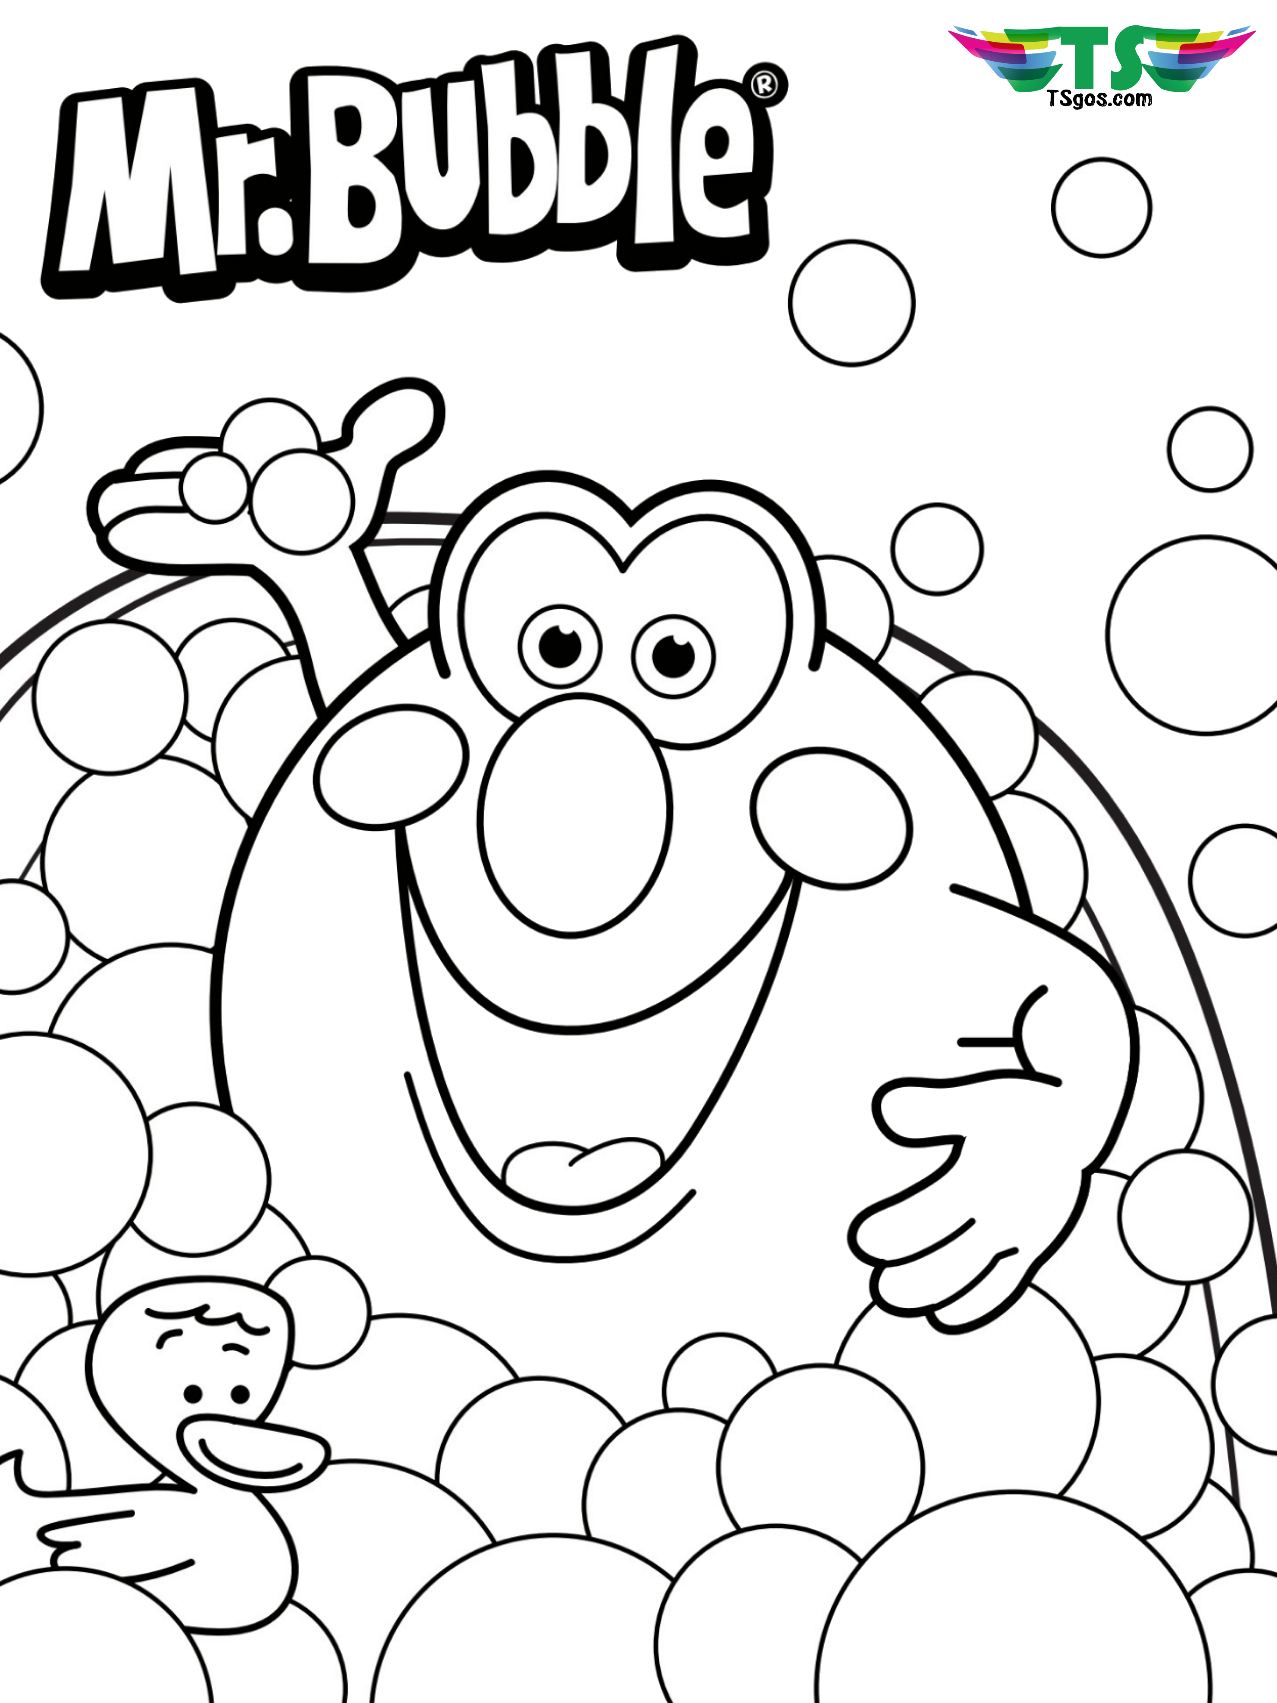 Mr bubble coloring page for toddlers